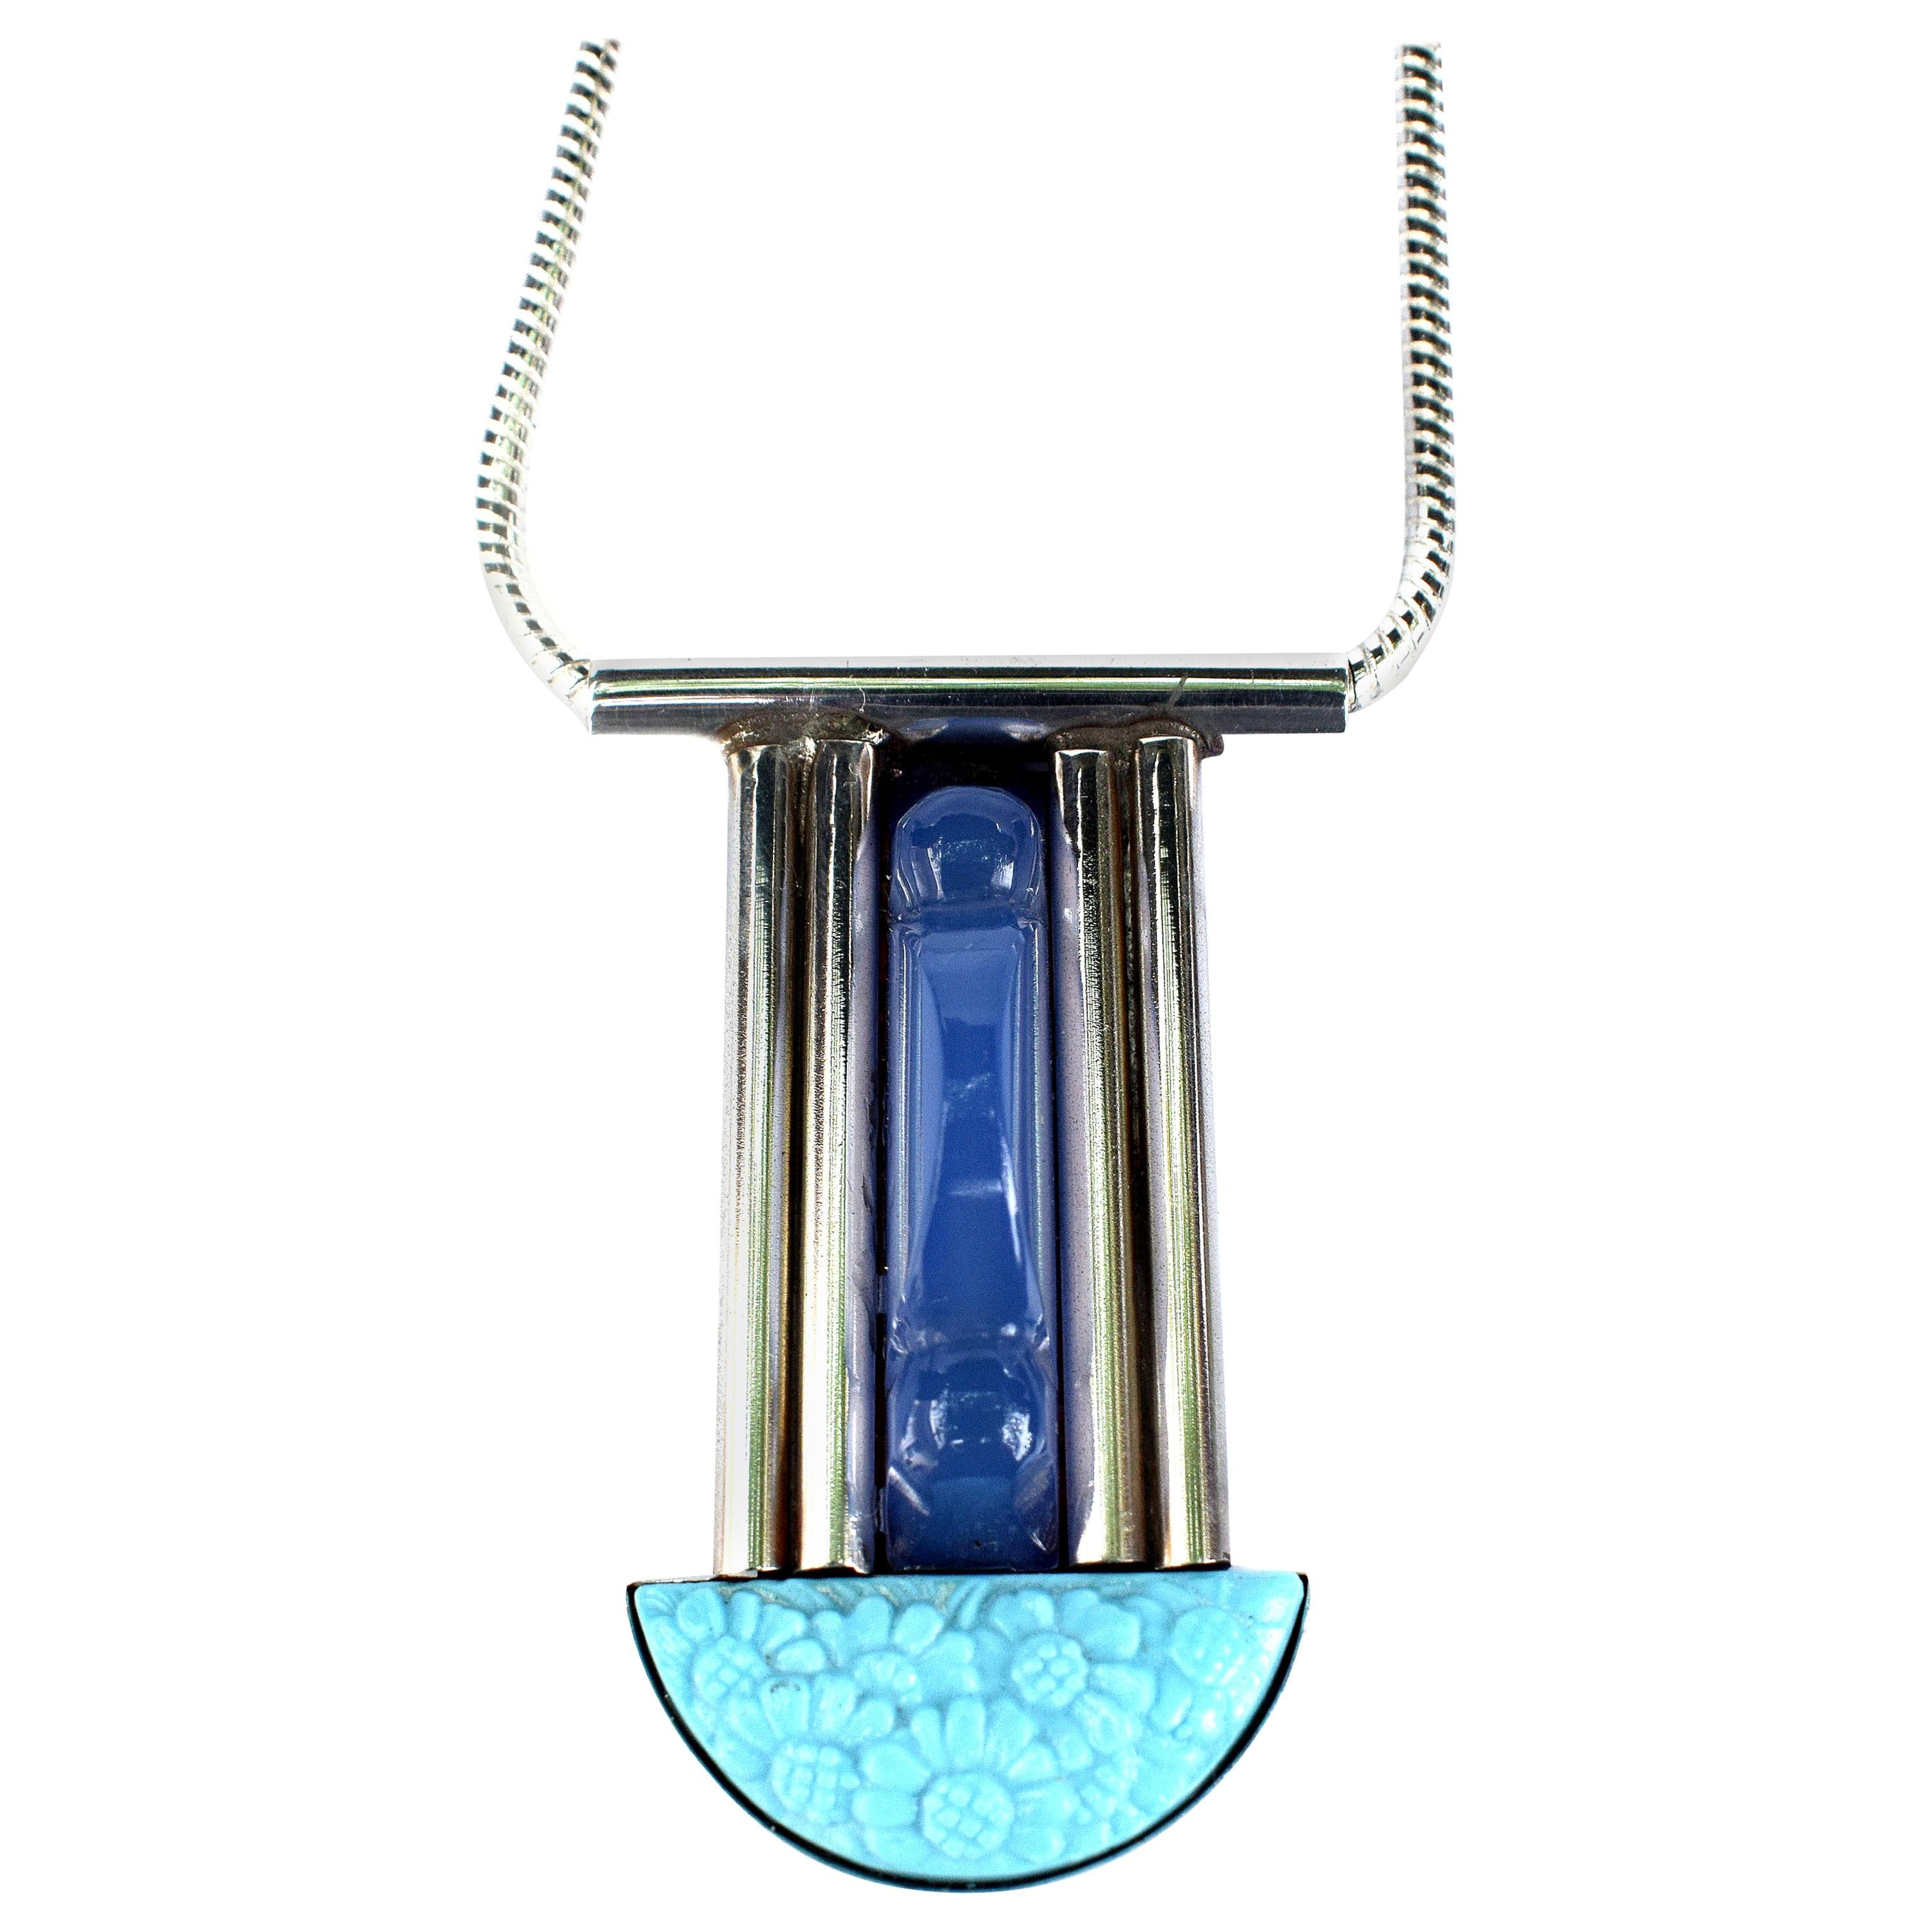 Fabulous Modernist French Statement Pendant Necklace